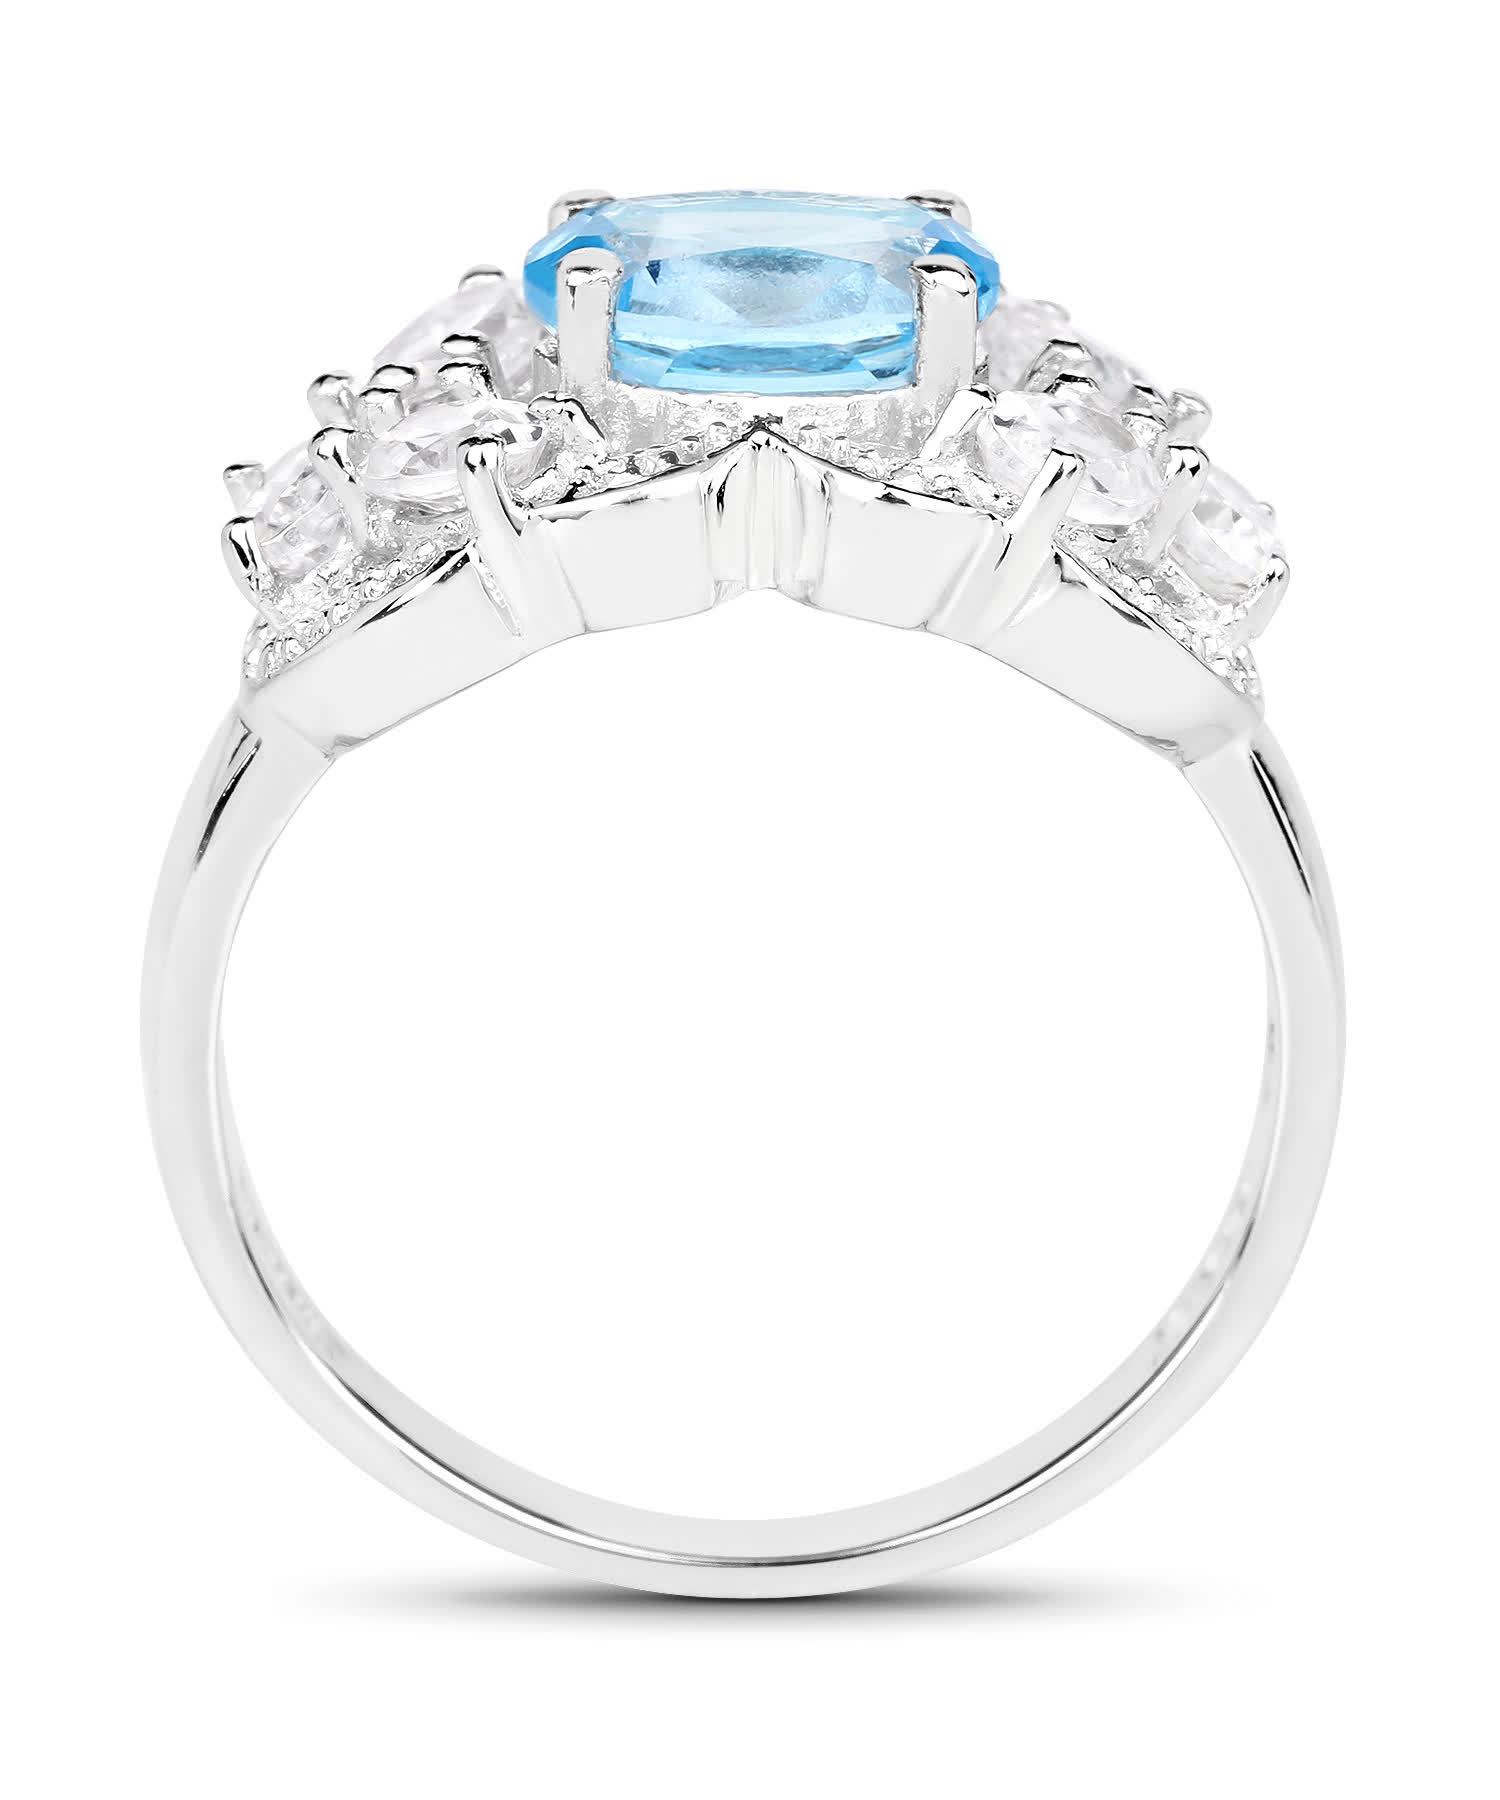 3.20ctw Natural Sky Blue Topaz and Zircon Rhodium Plated 925 Sterling Silver Ring View 2